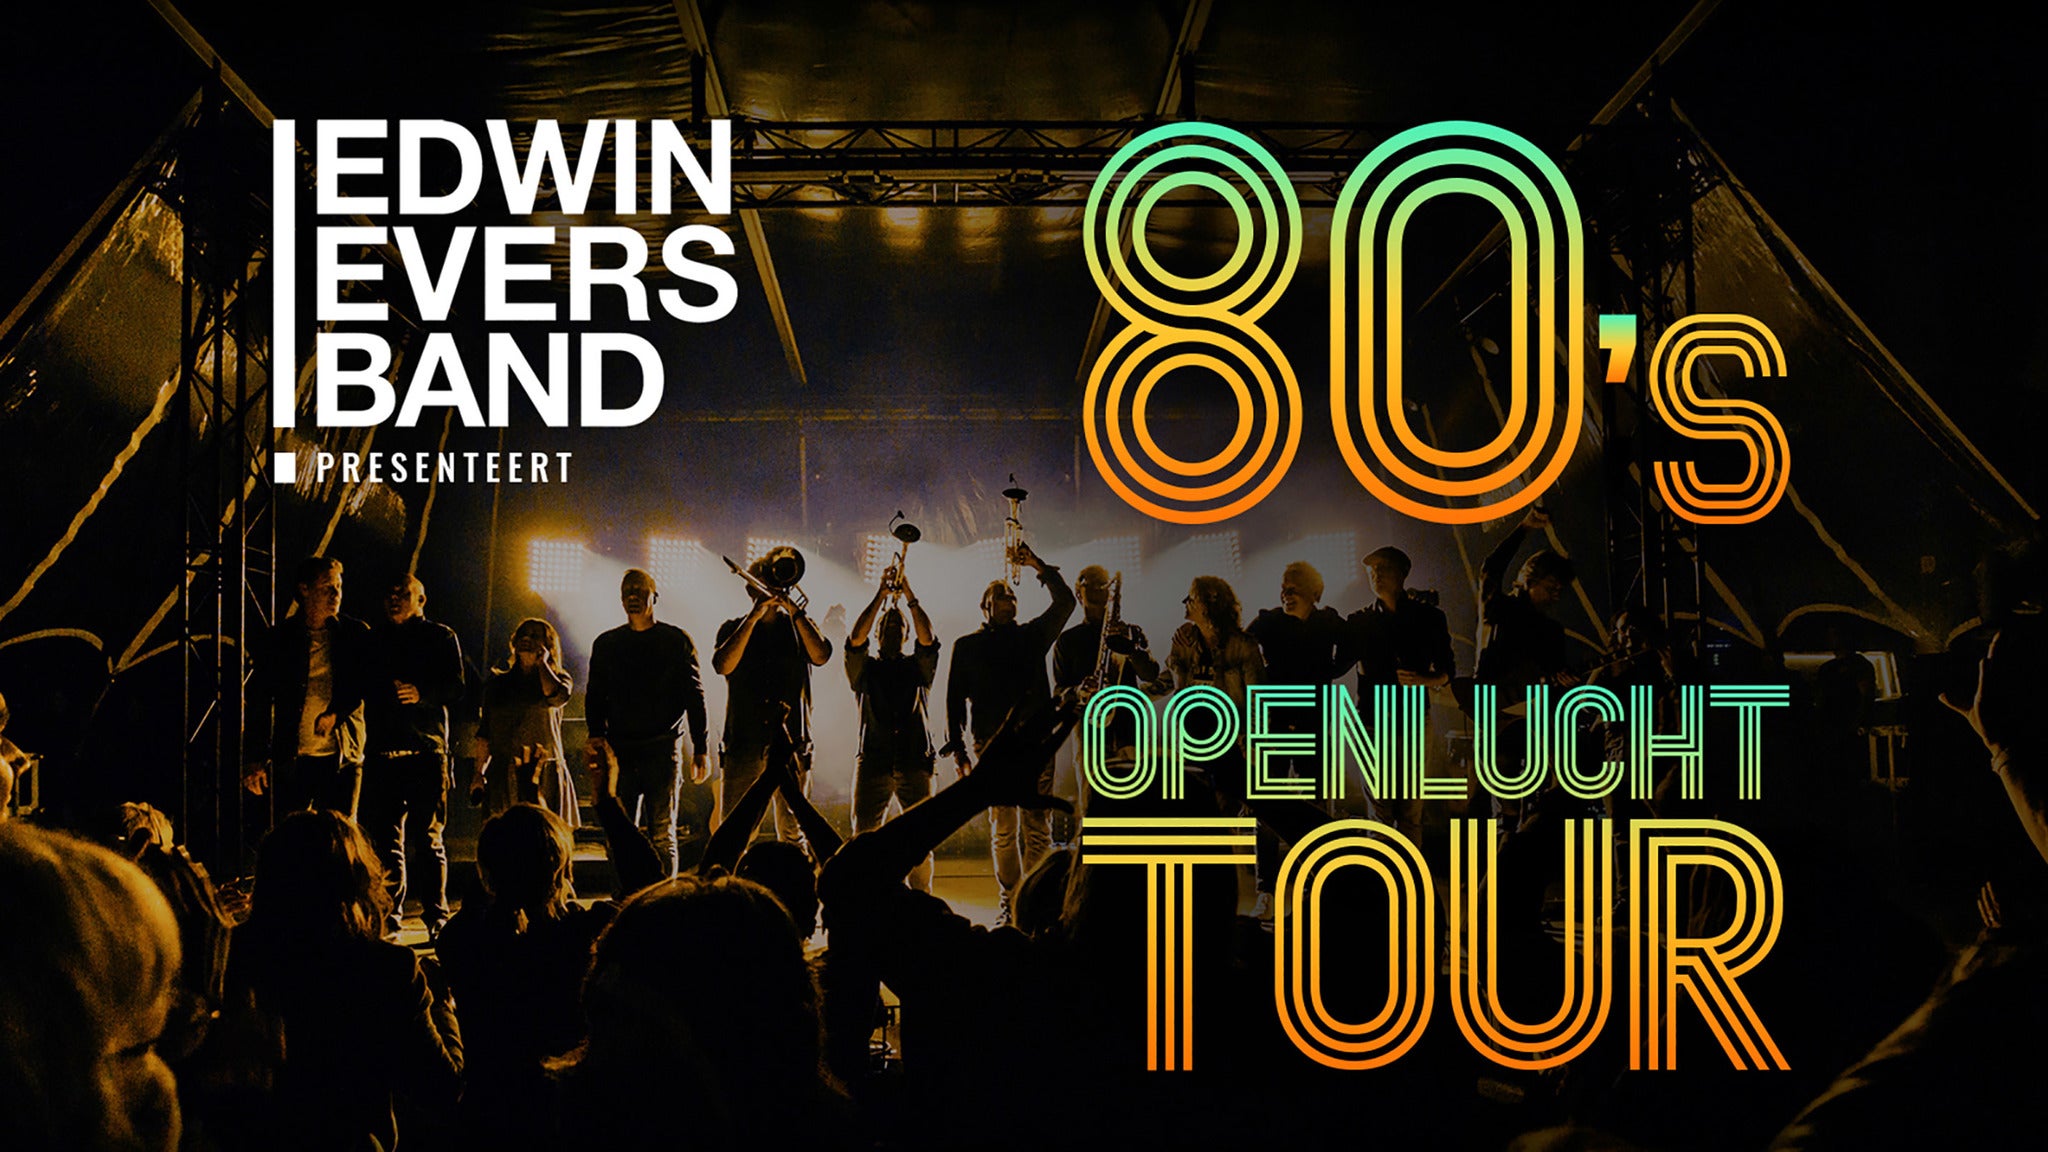 Edwin Evers Band - 80's Clubtour